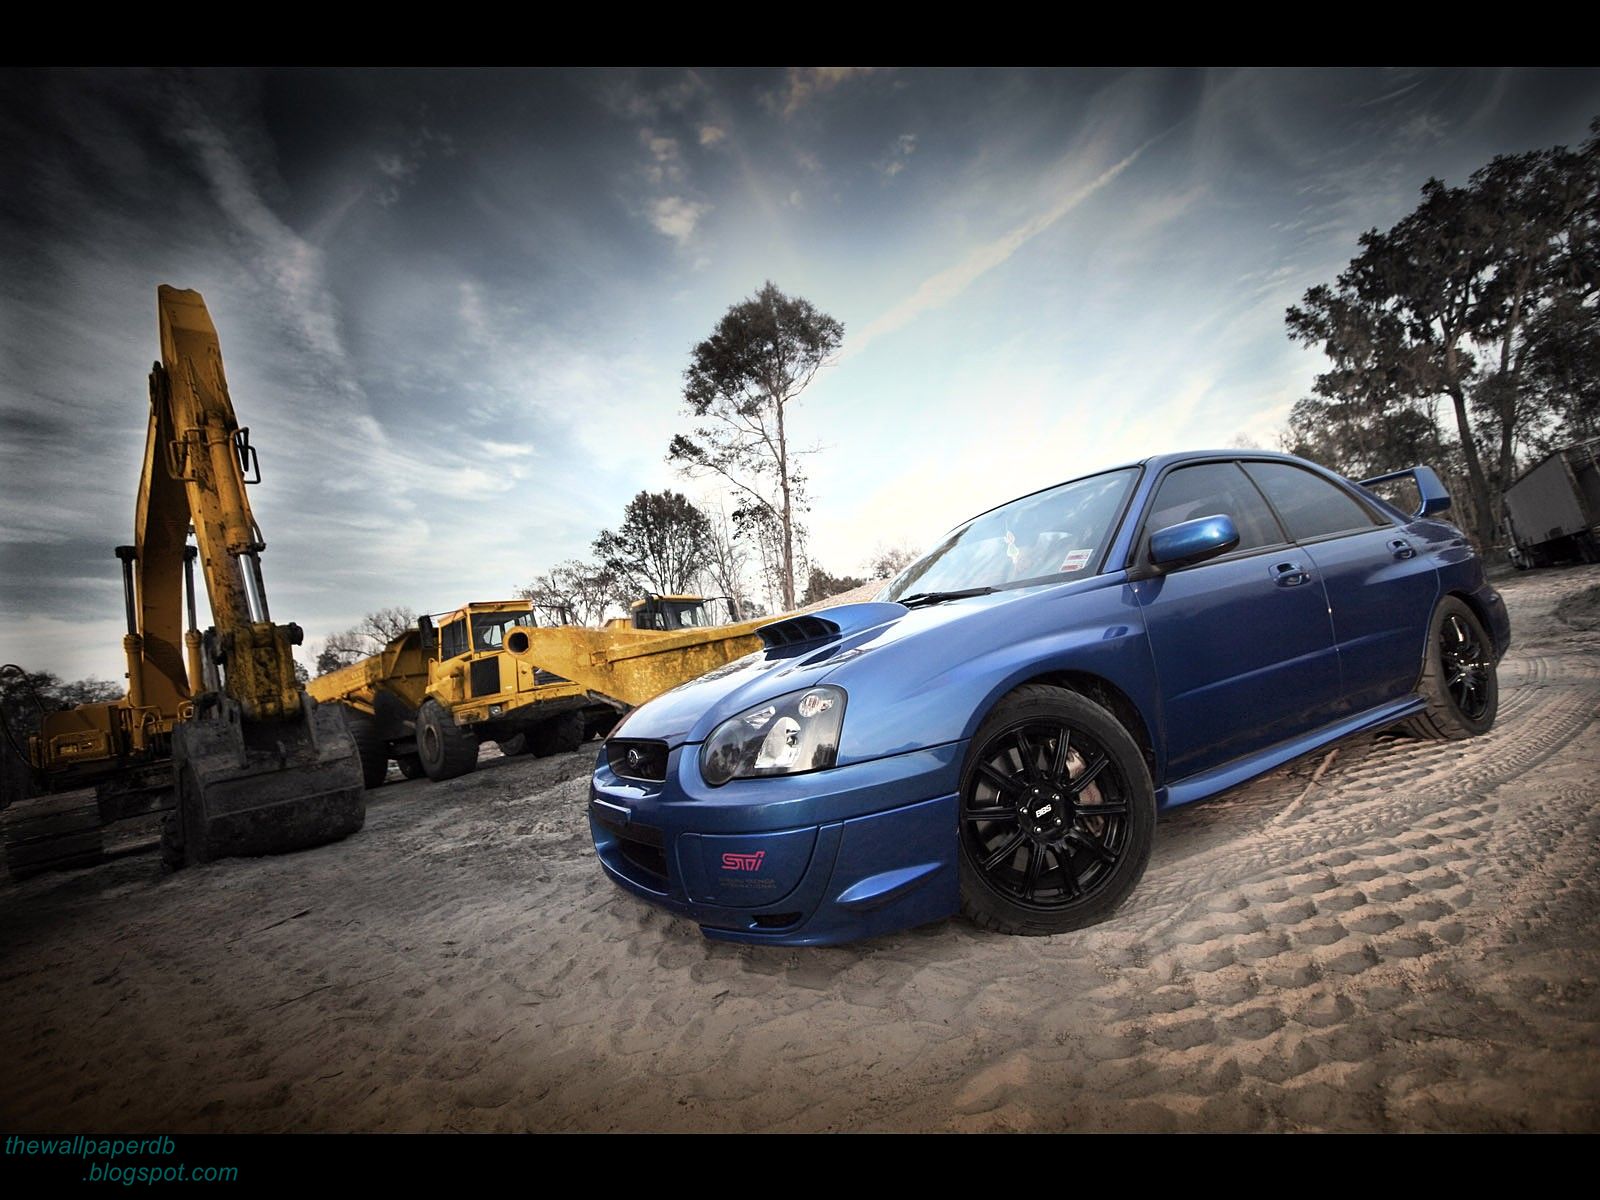 ... STI blue legend wallpaper | Home of Wallpapers | Free download hd